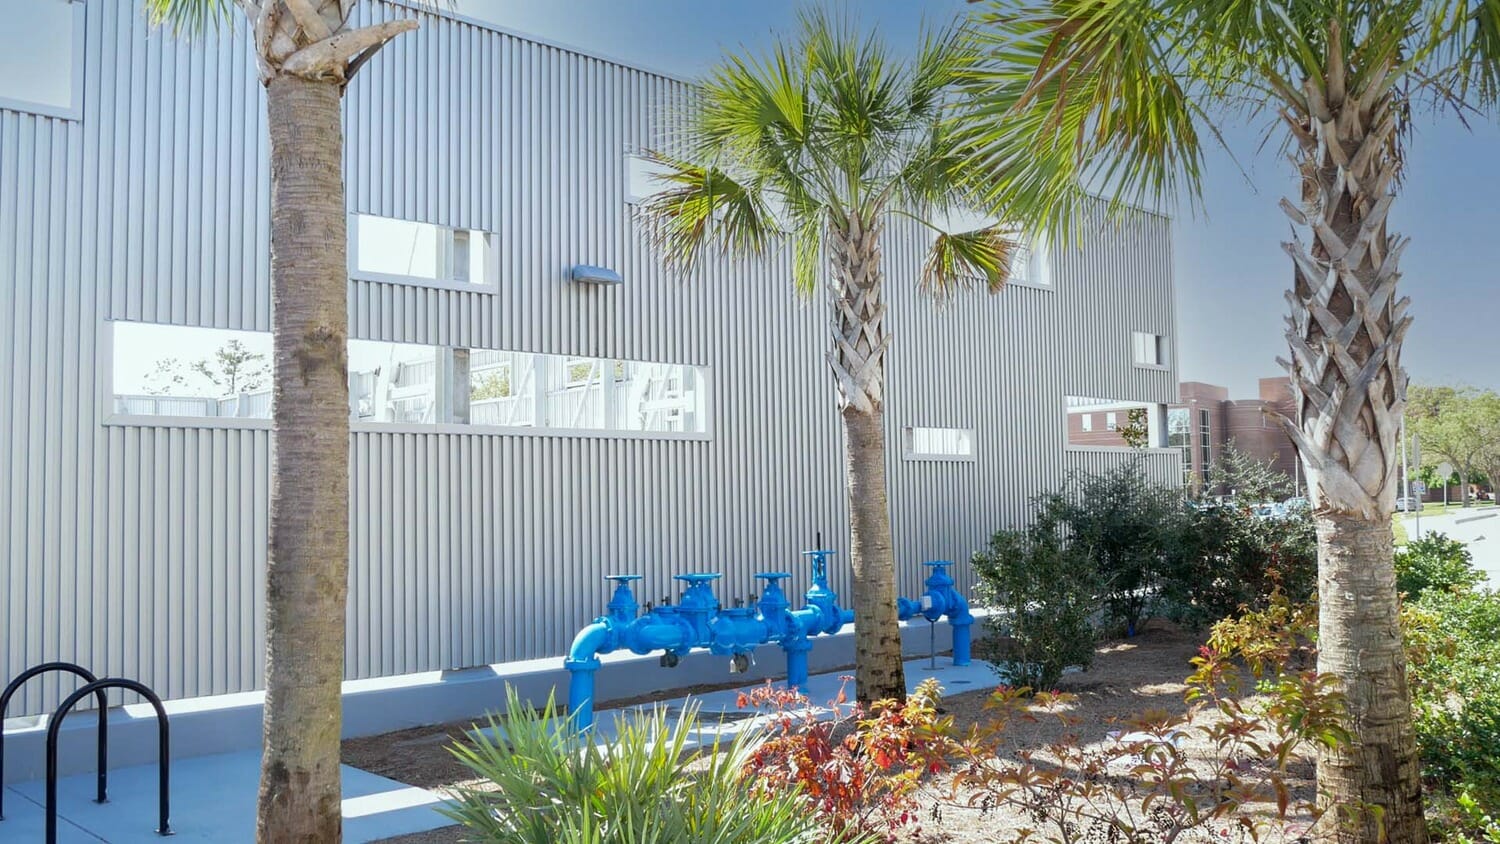 A building with a blue fence and palm trees.